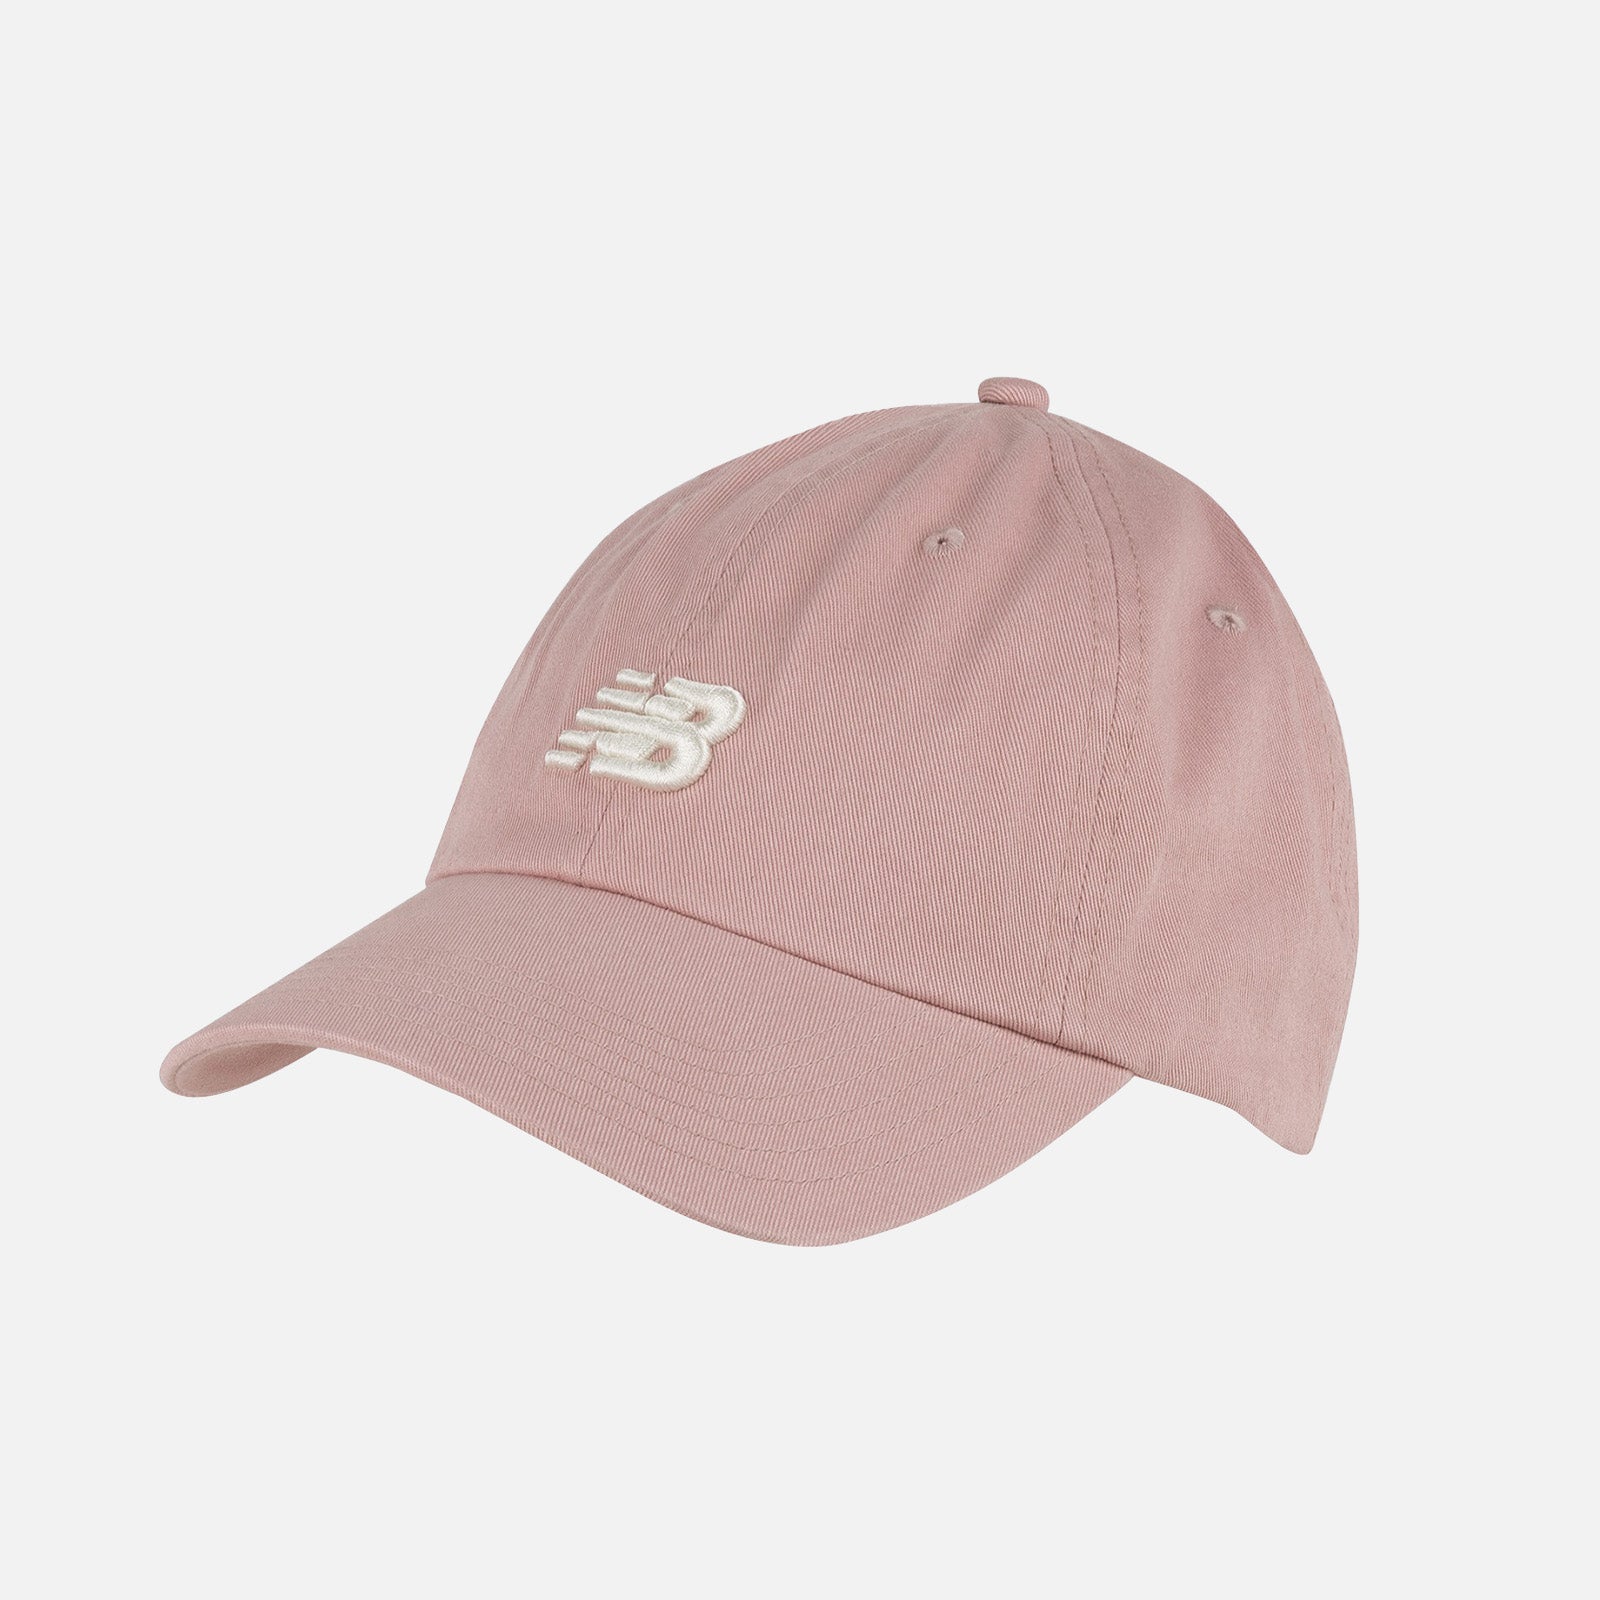 NEW BALANCE 6 PANEL Curved Brim NB Classic Cap in Pink Moon LAH91014 O/S PINK MOON FROM EIGHTYWINGOLD - OFFICIAL BRAND PARTNER